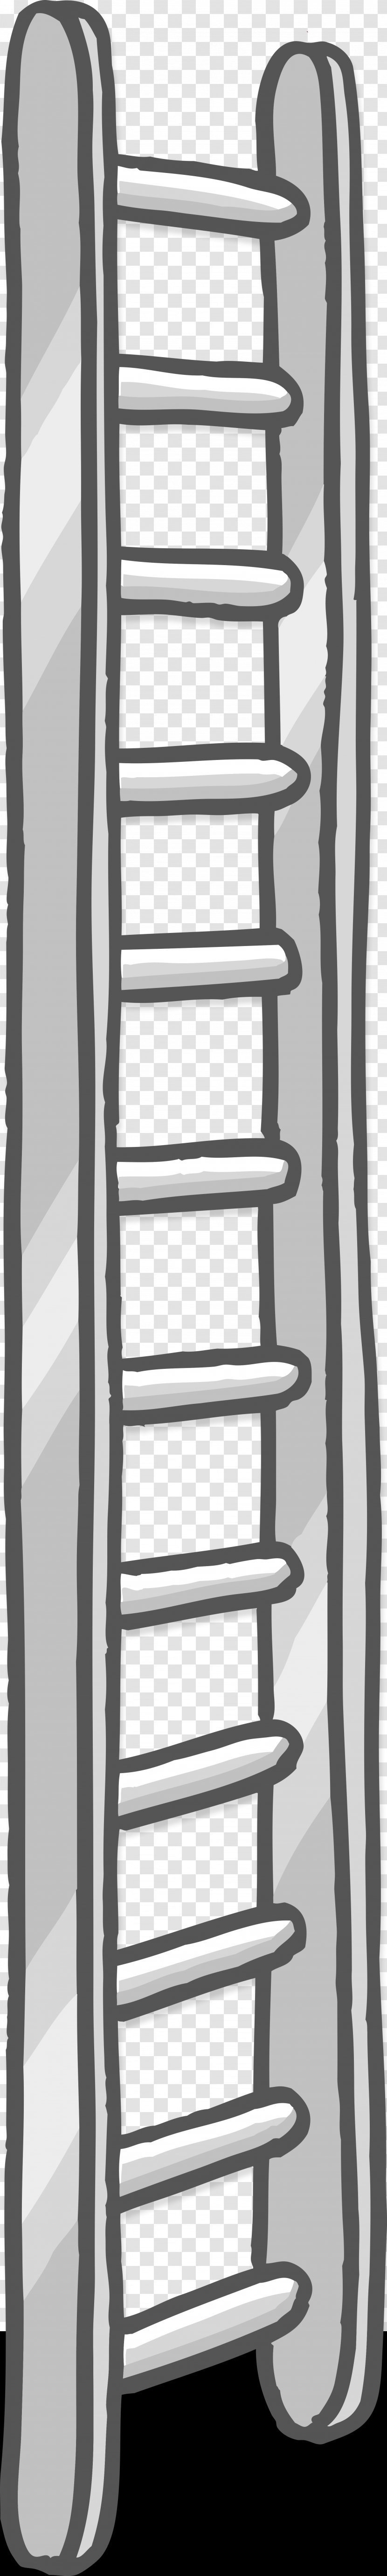 Ladder Stairs Icon Transparent PNG